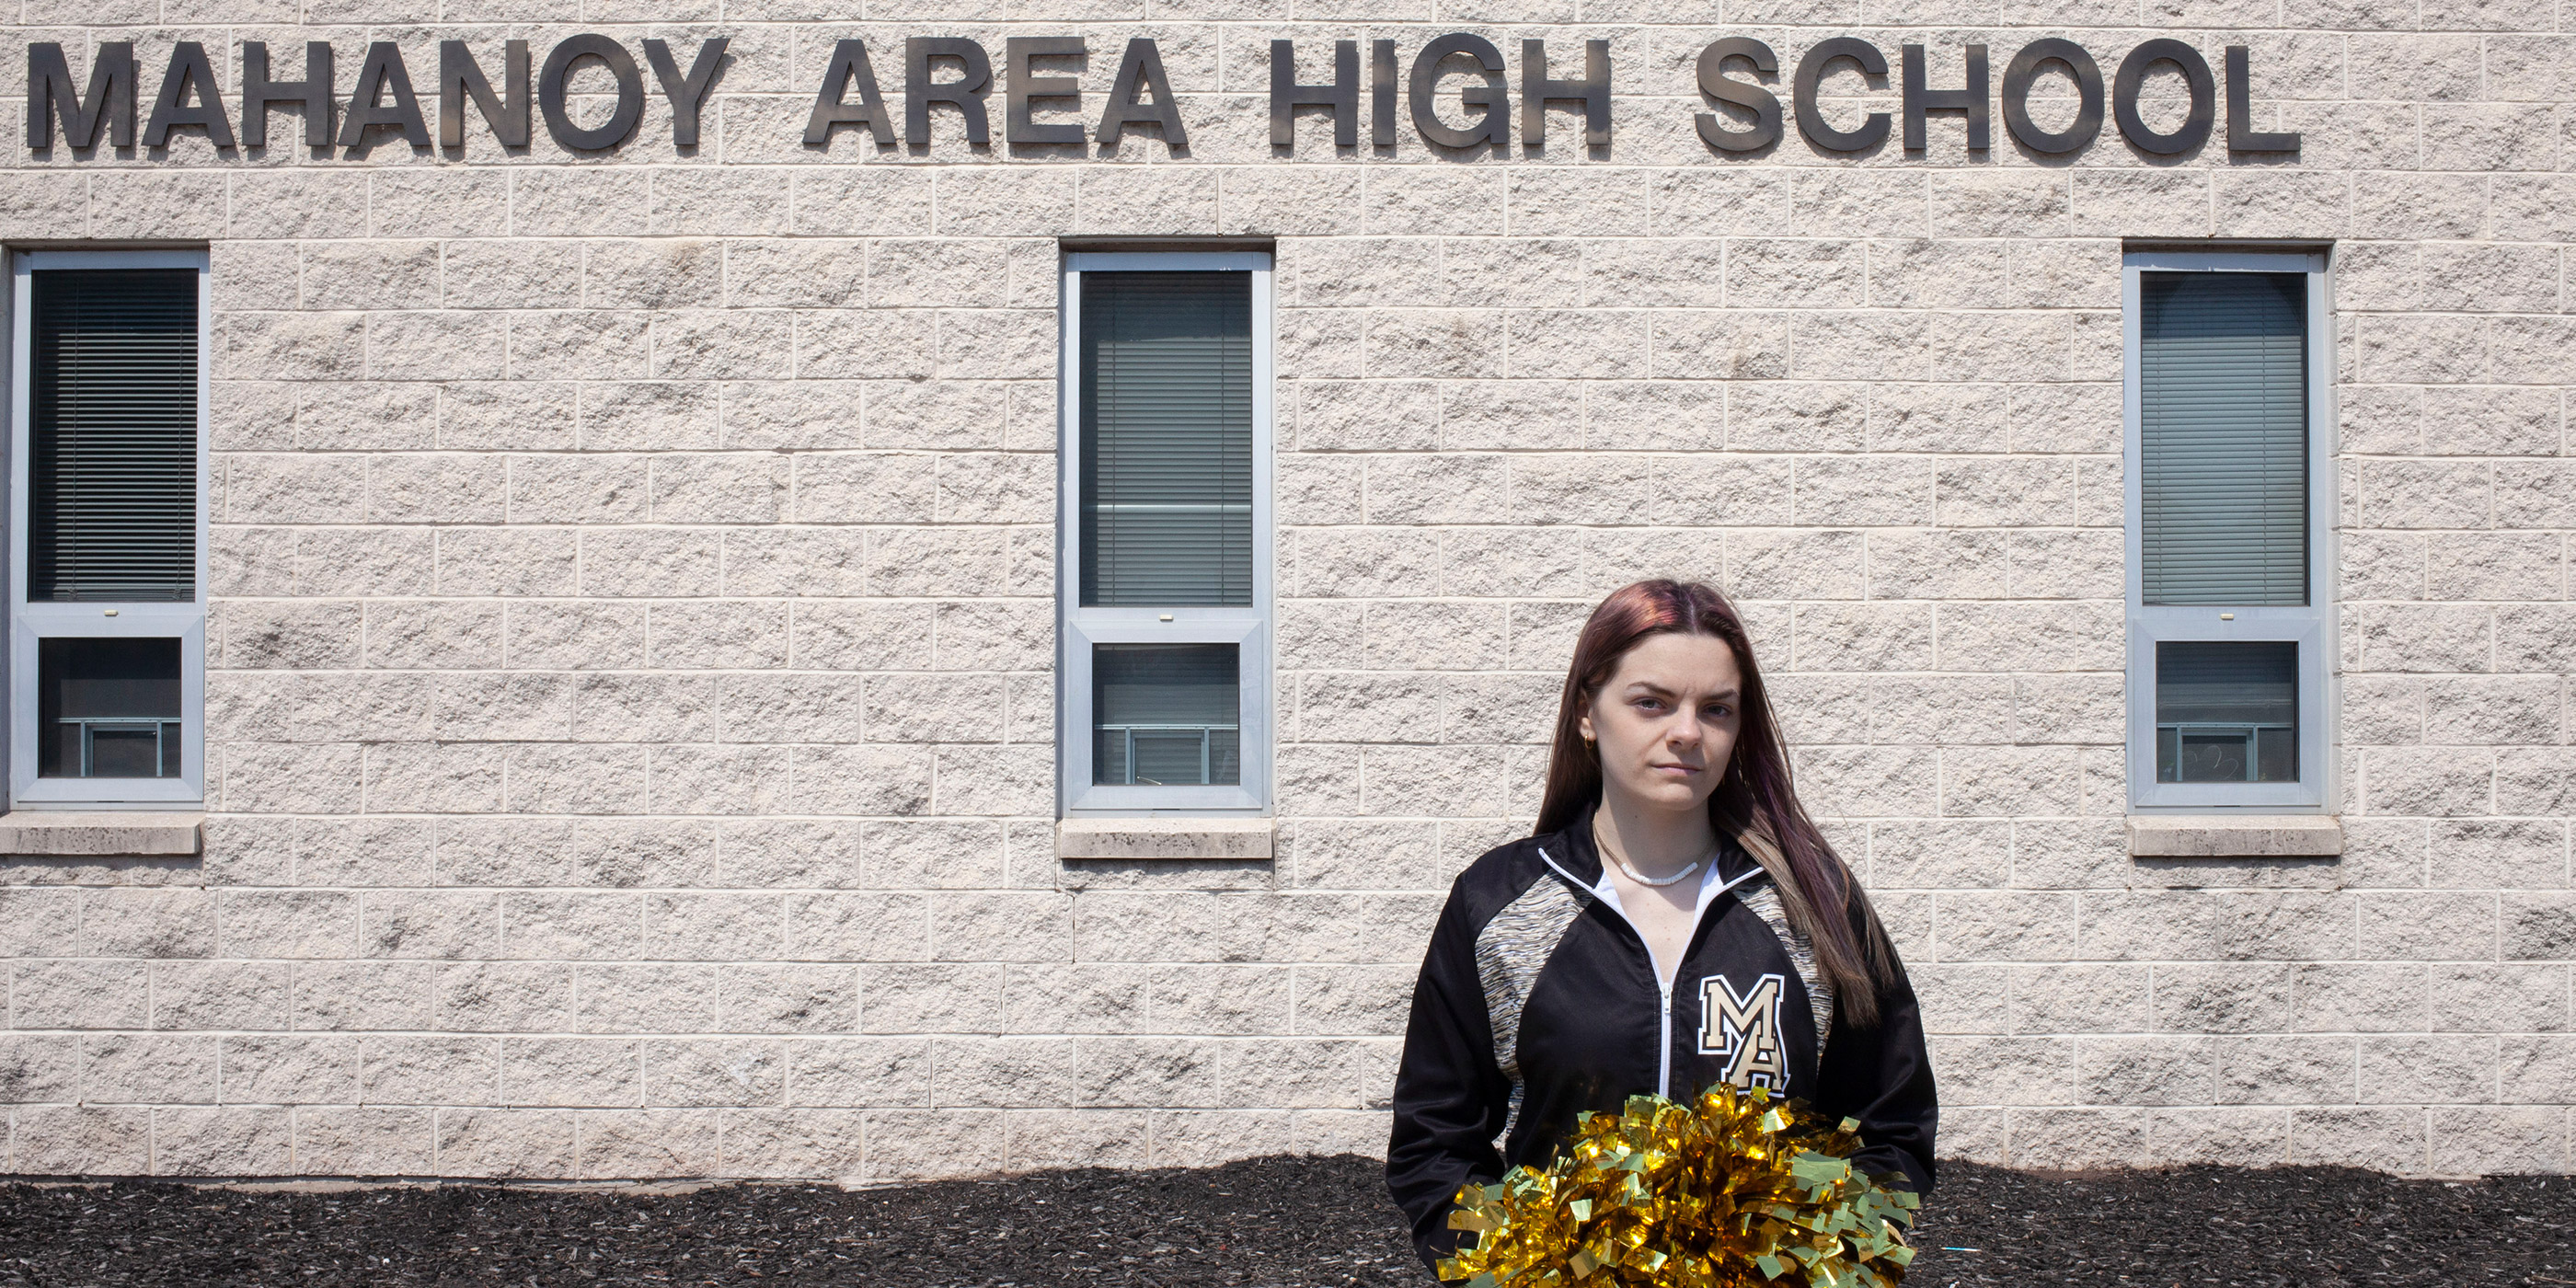 A photo of Brandi Levy holding gold pom-poms in front of Mahanoy Area High School.